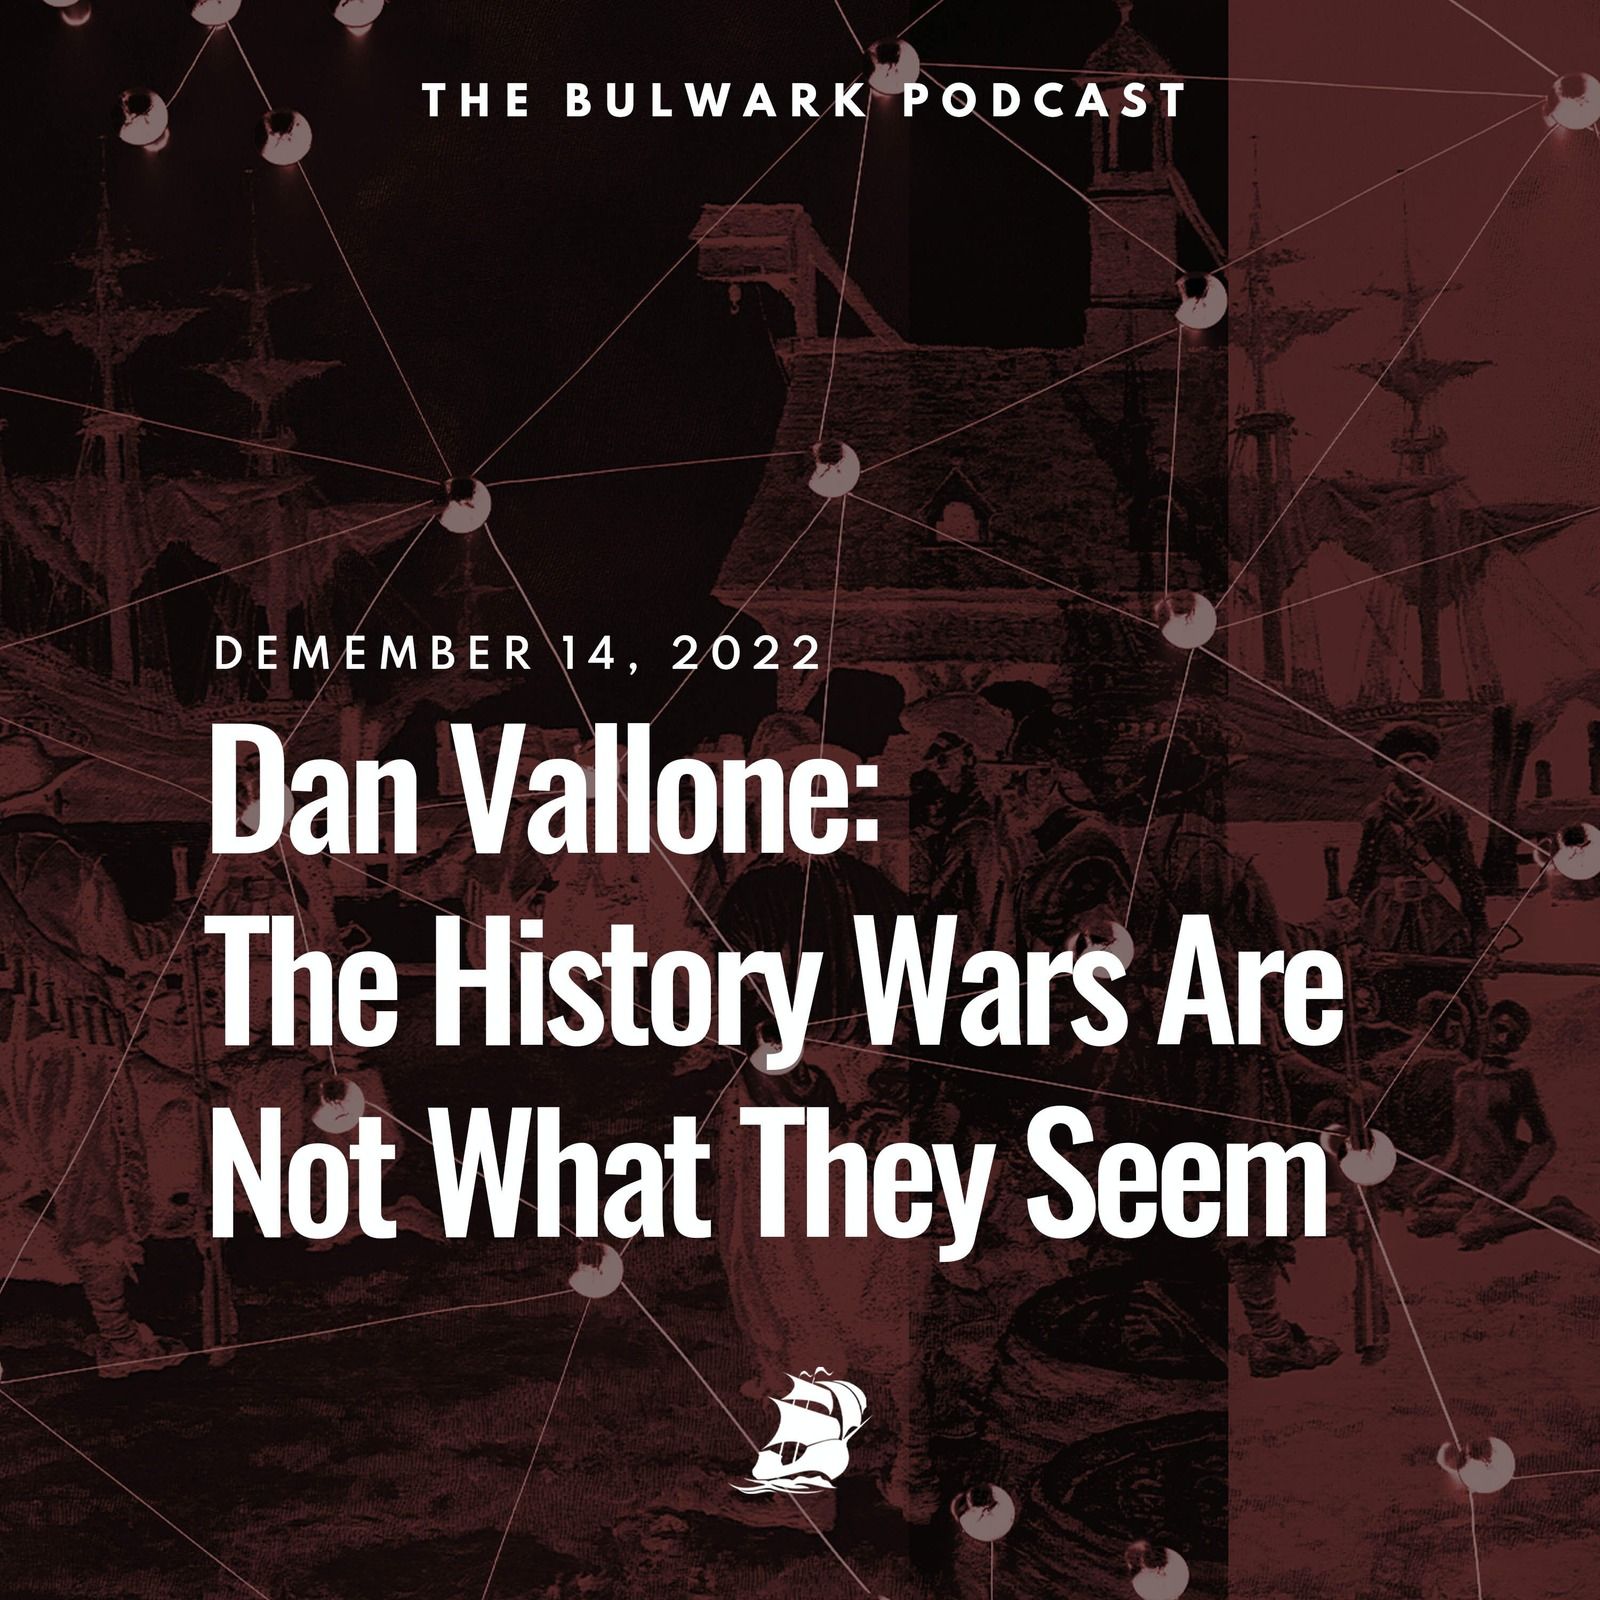 Dan Vallone: The History Wars Are Not What They Seem by The Bulwark Podcast